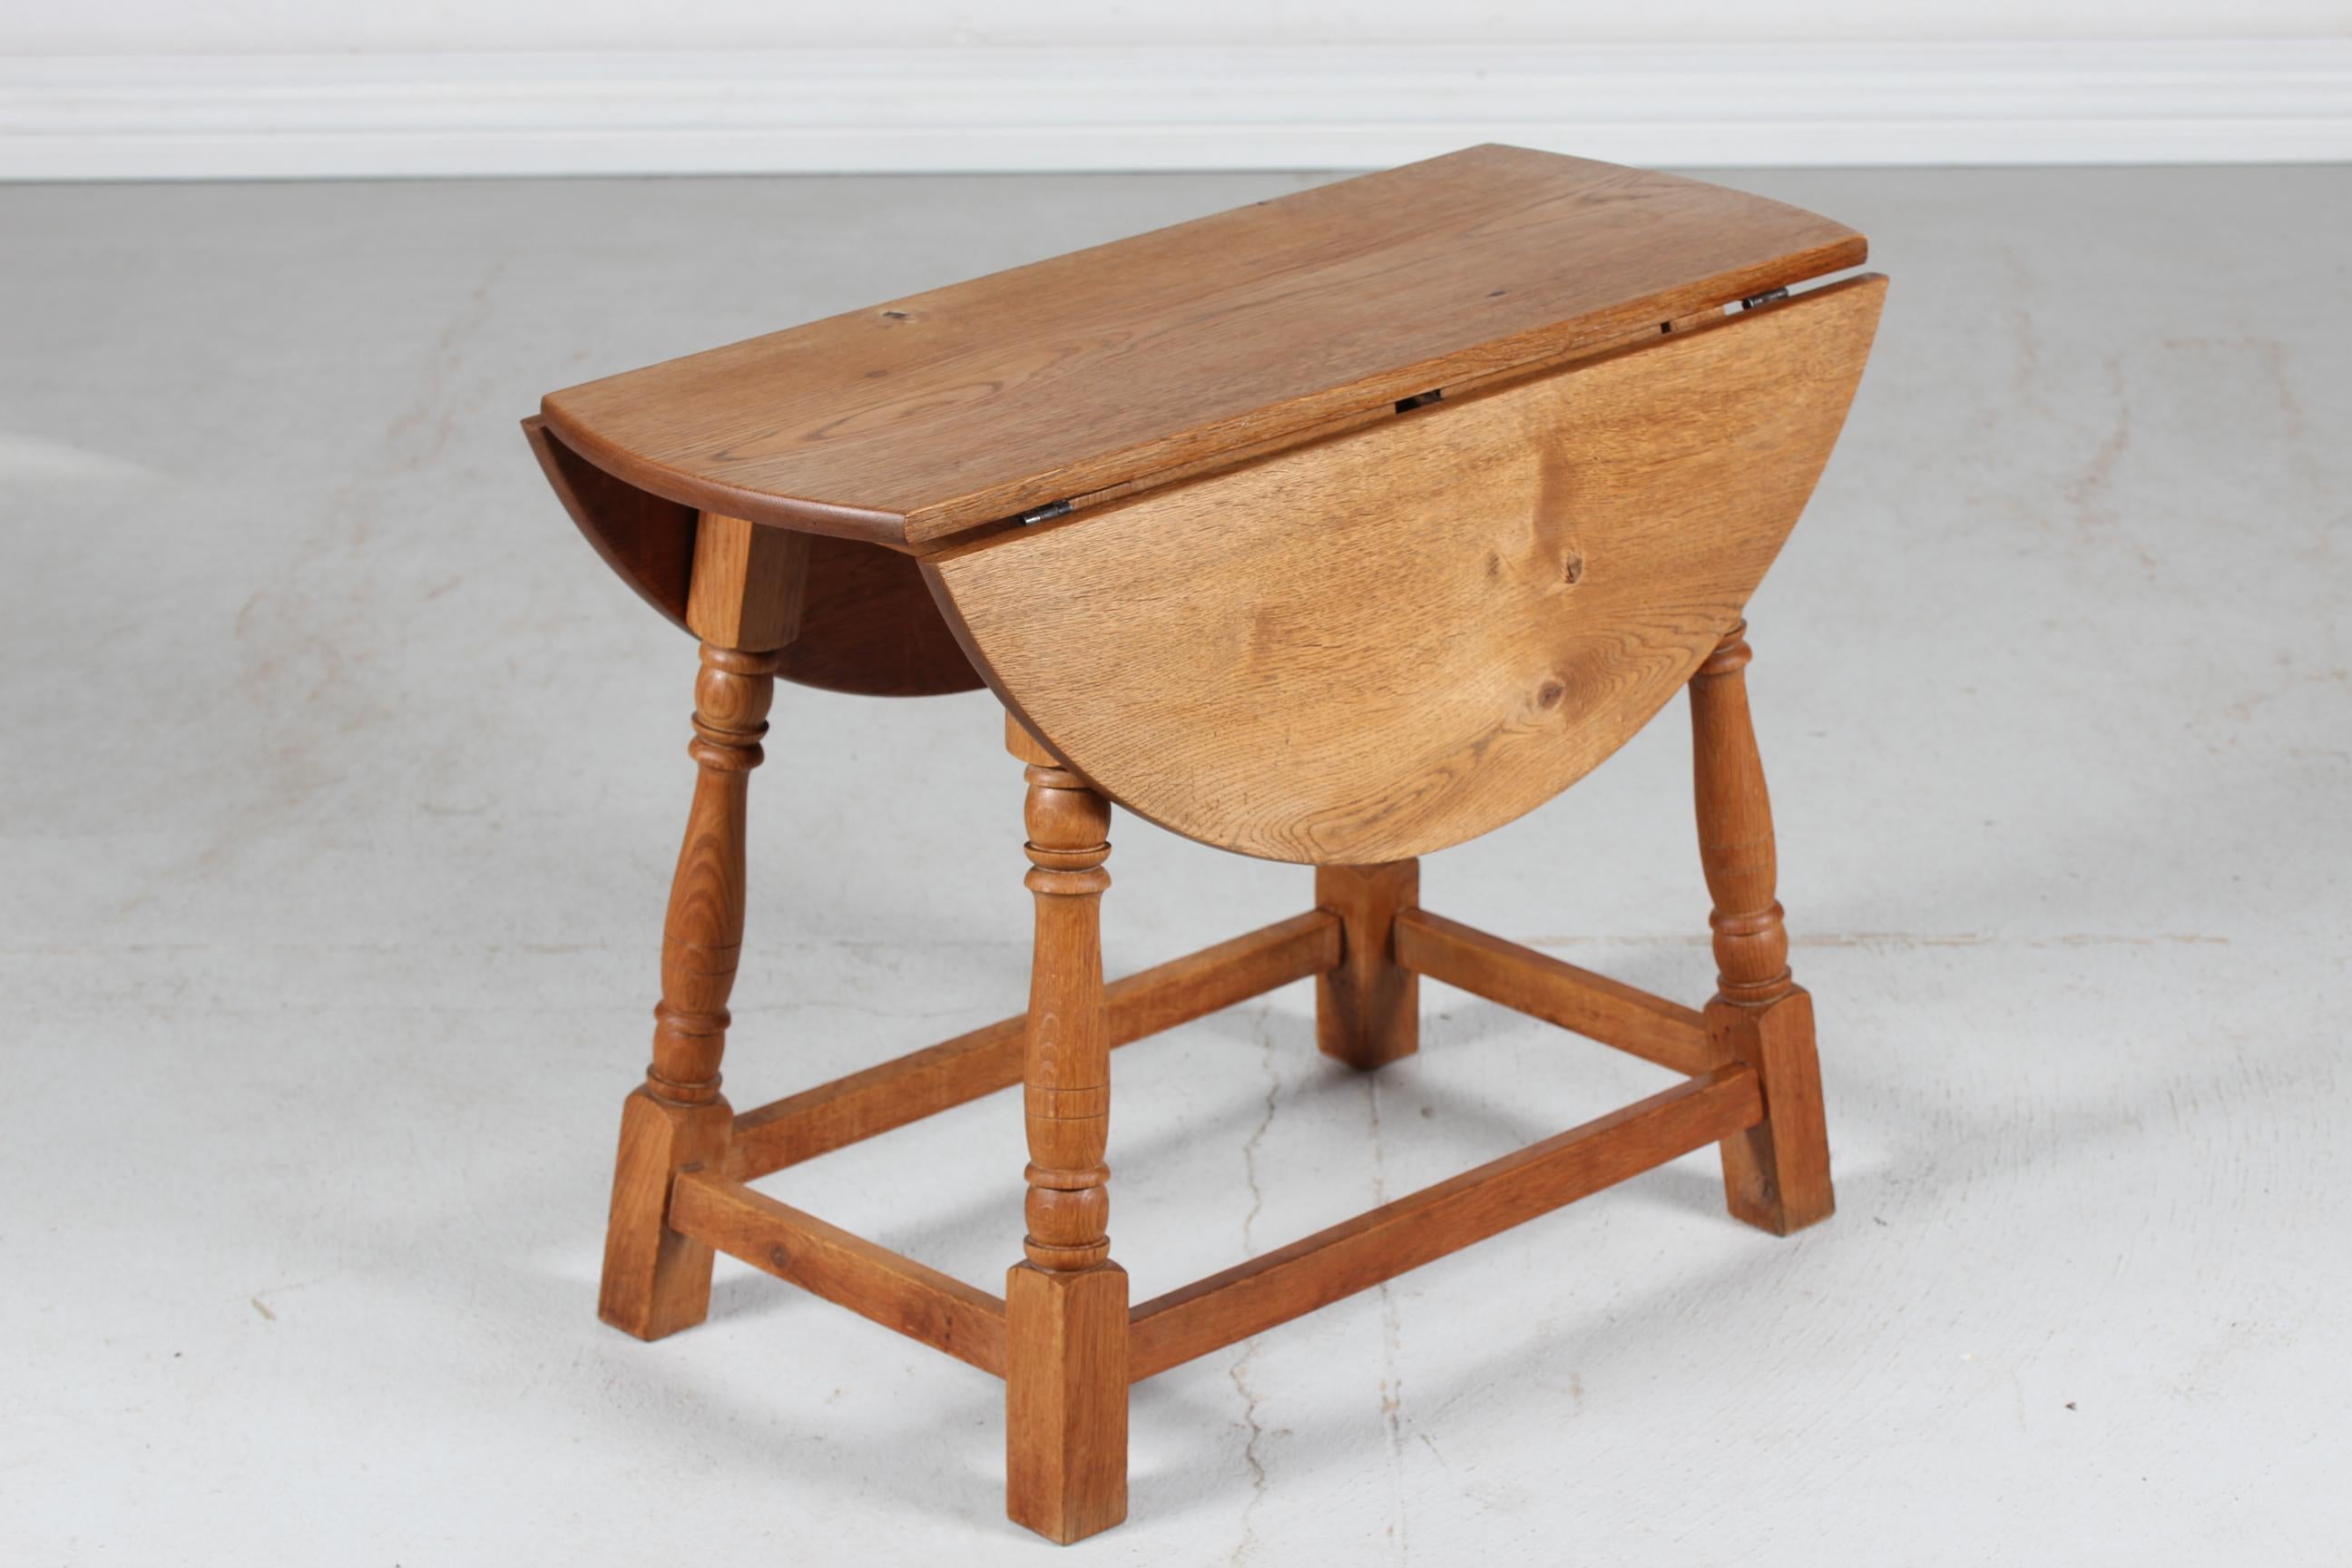 Mid-Century Modern Danish Brutalist Style Small Drop-Leaf Coffee Table Made of Solid Oak, 1940's For Sale